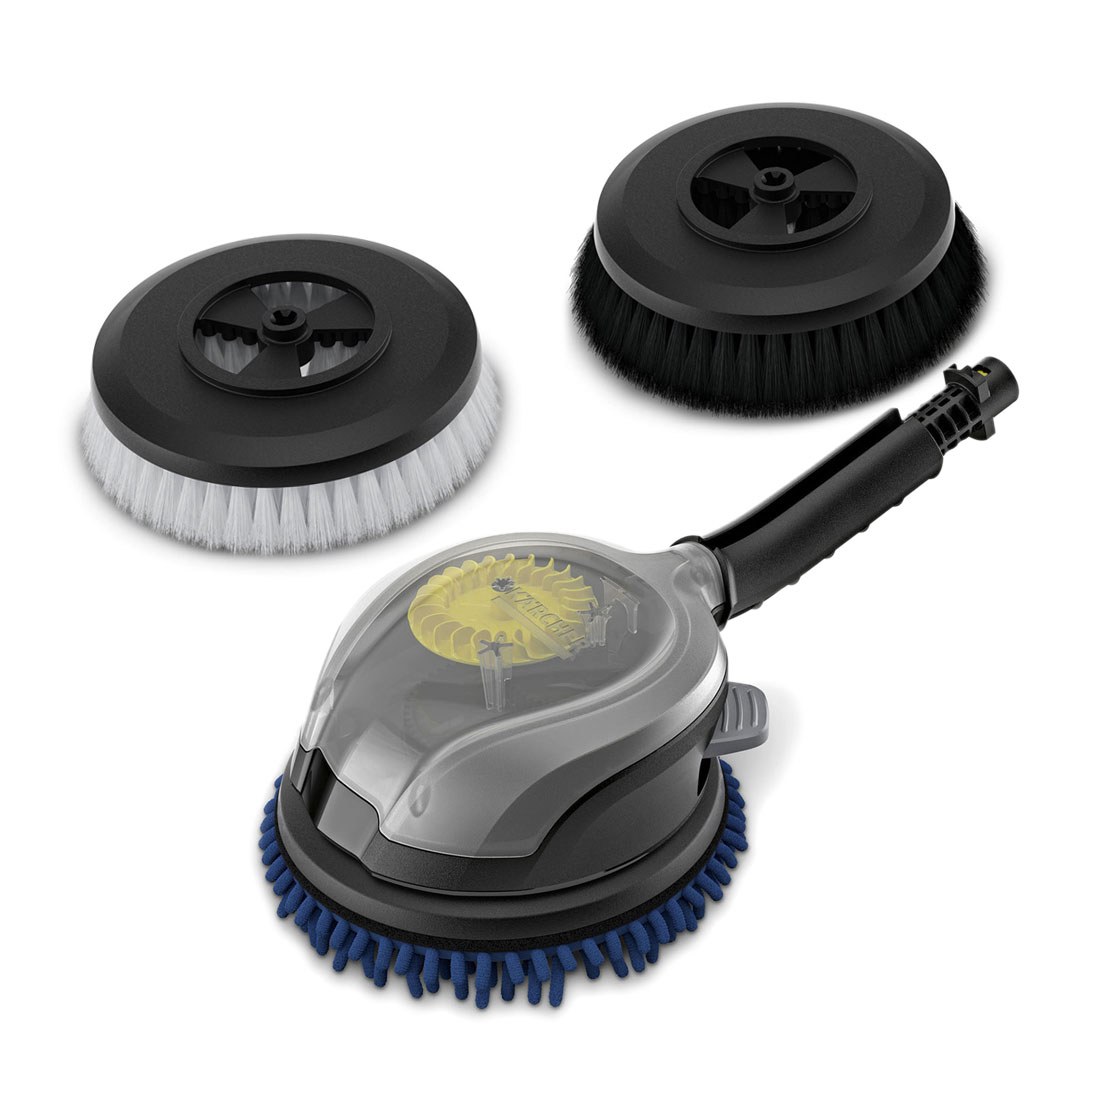 Confuse elevation Pacific Islands Karcher WB 120 Rotating Wash Brush + 3 x Attachments Bundle For Pressure  Washers | Powertool World